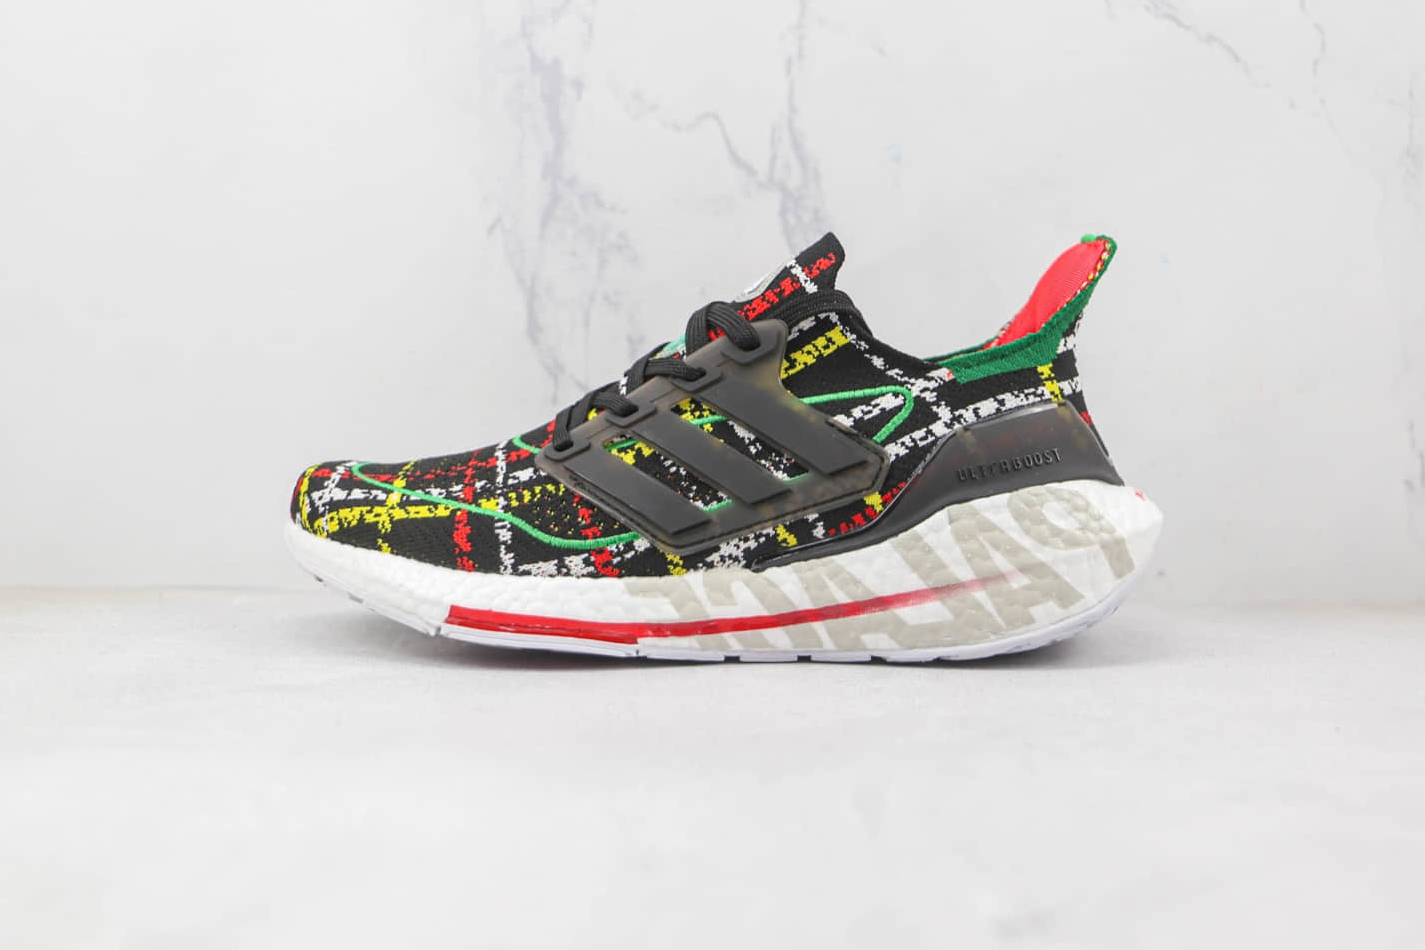 Adidas Palace x UltraBoost 21 'Black Multicolor' GY5555 - Stylish & Colorful Boost Sneakers